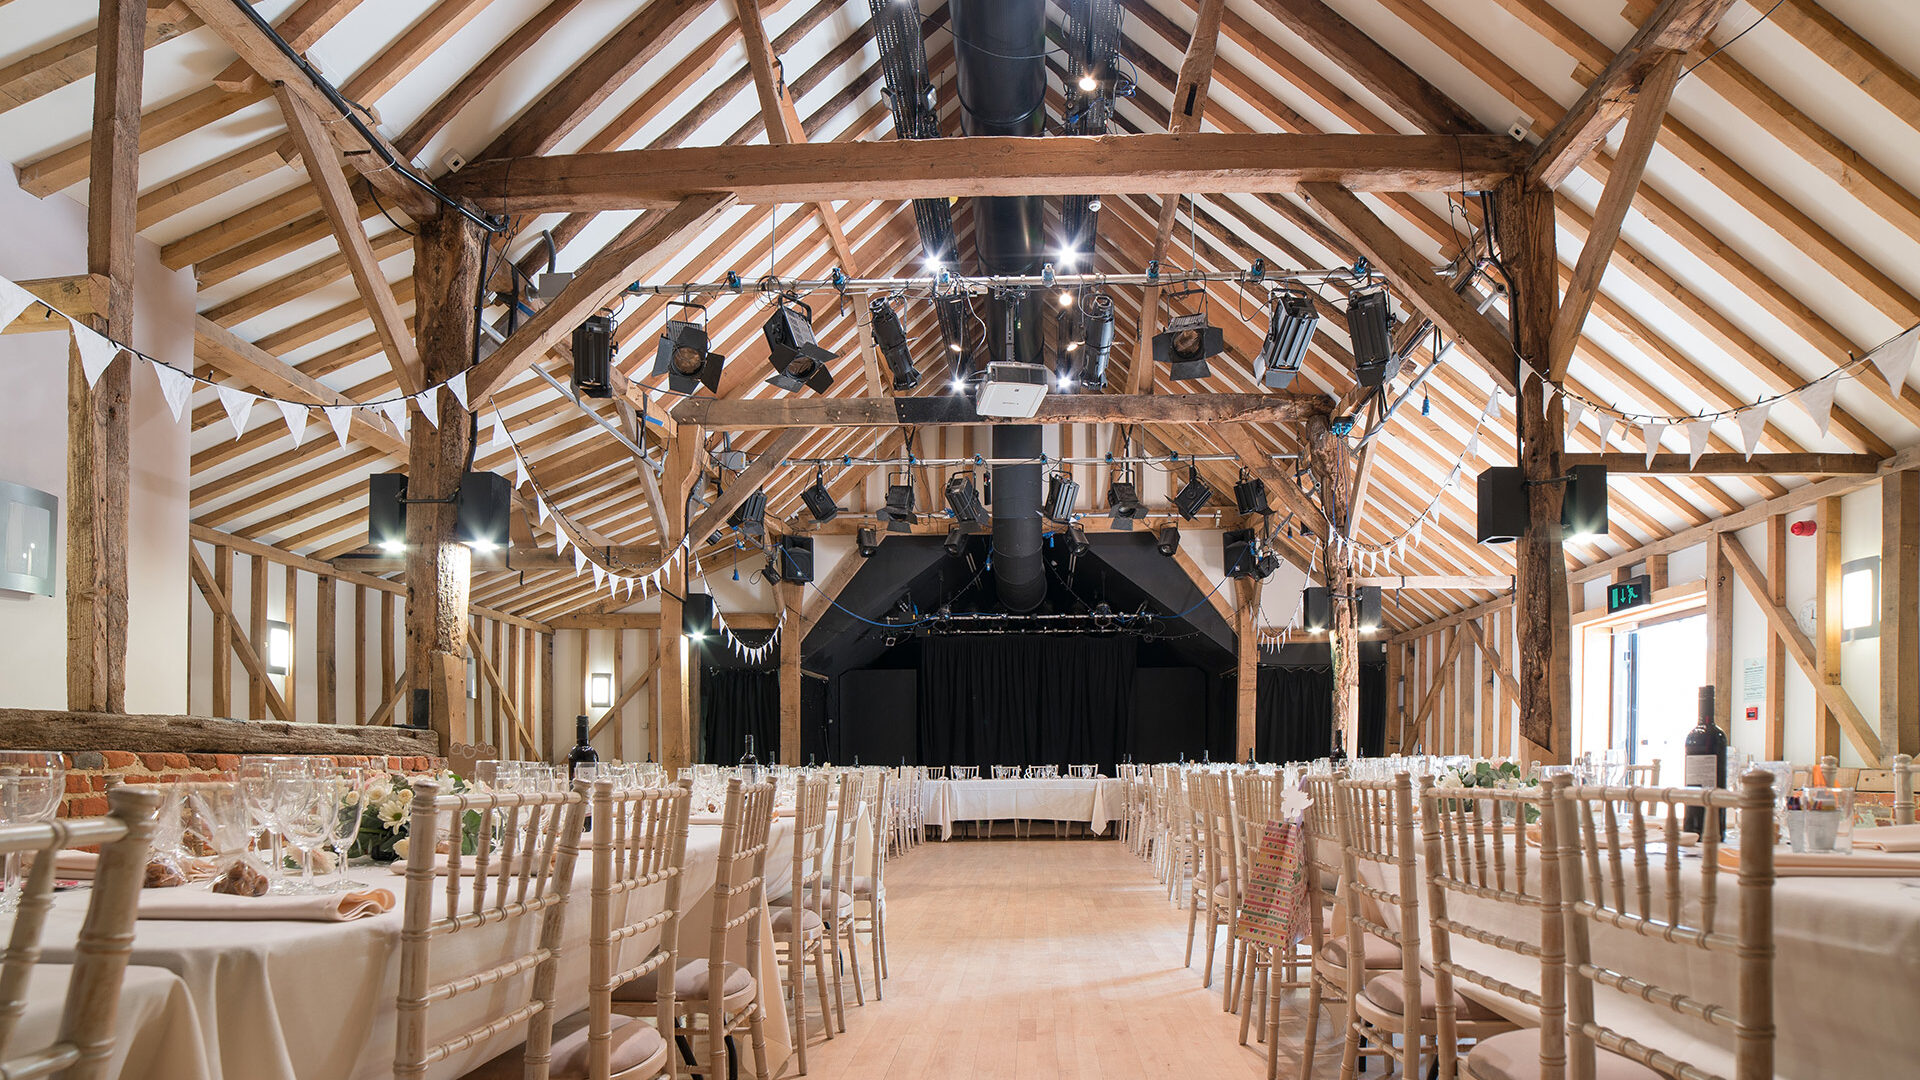 Barn set up for a wedding with exposed beams